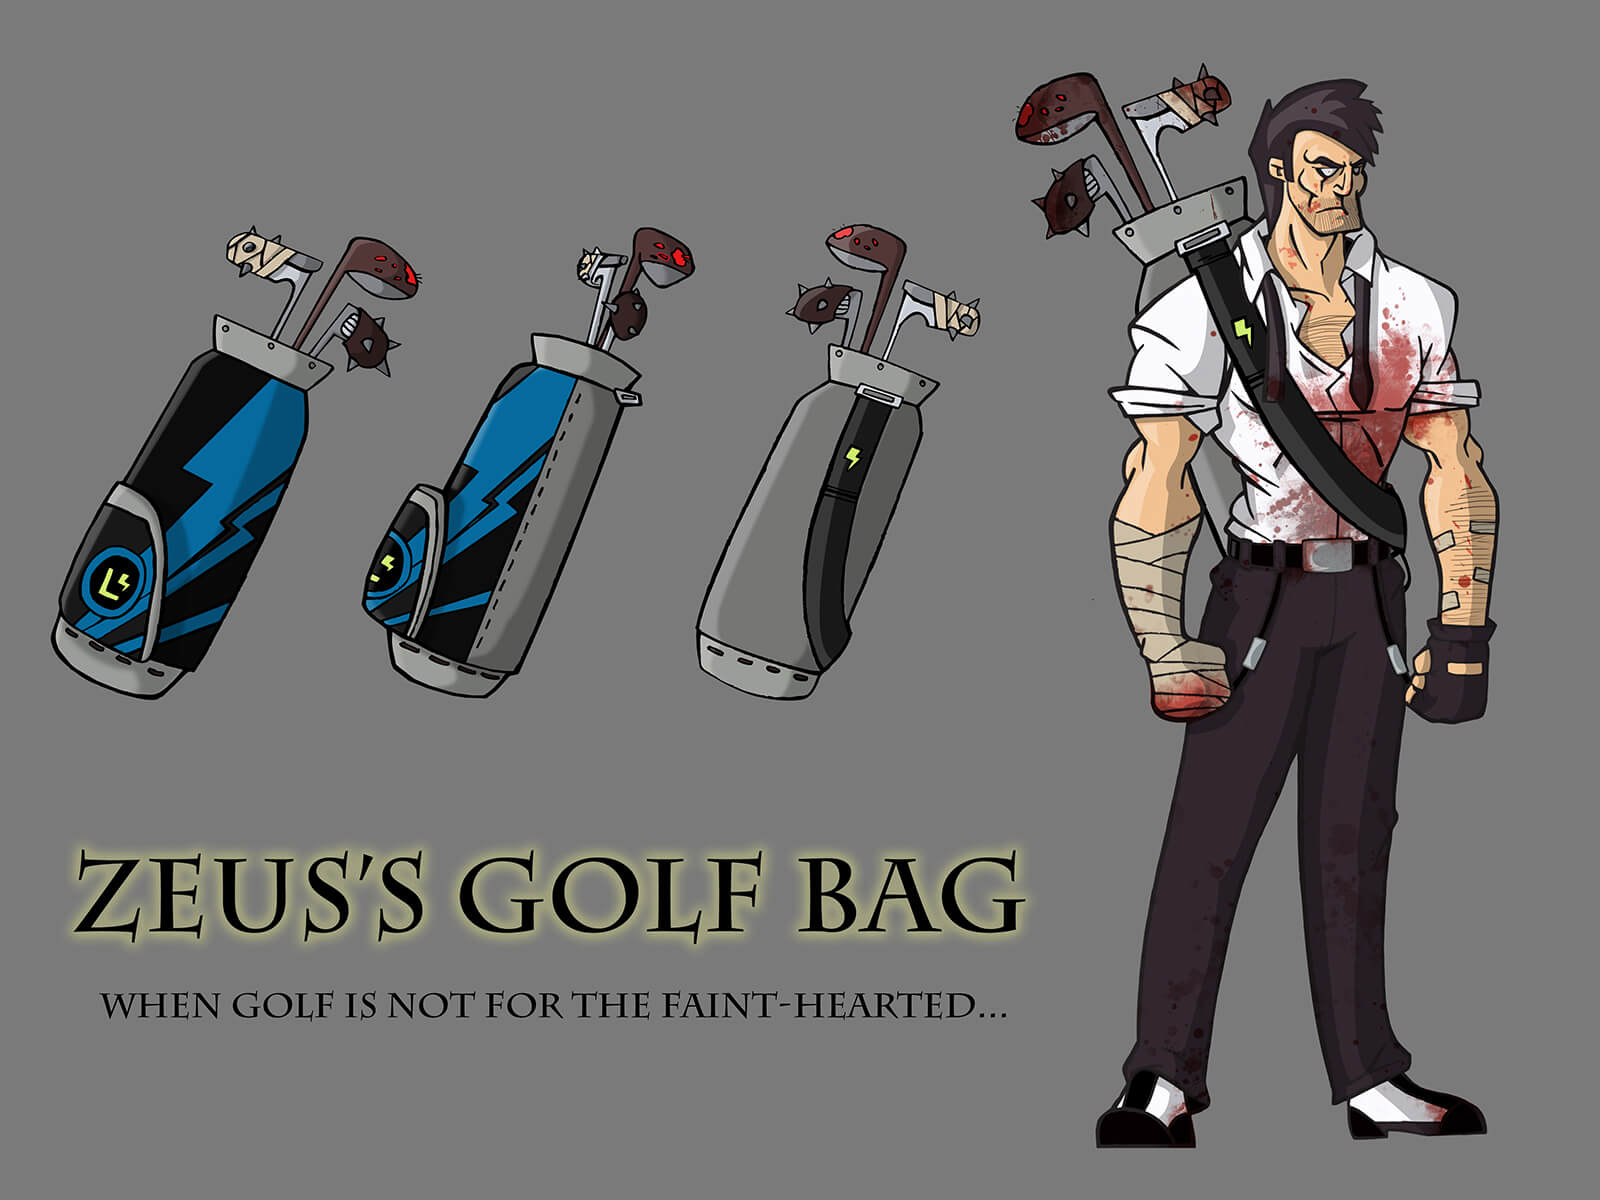 Cartoon sketches of a golf bag of threatening golf clubs, slung over the shoulder of a tall, blood-splattered man.